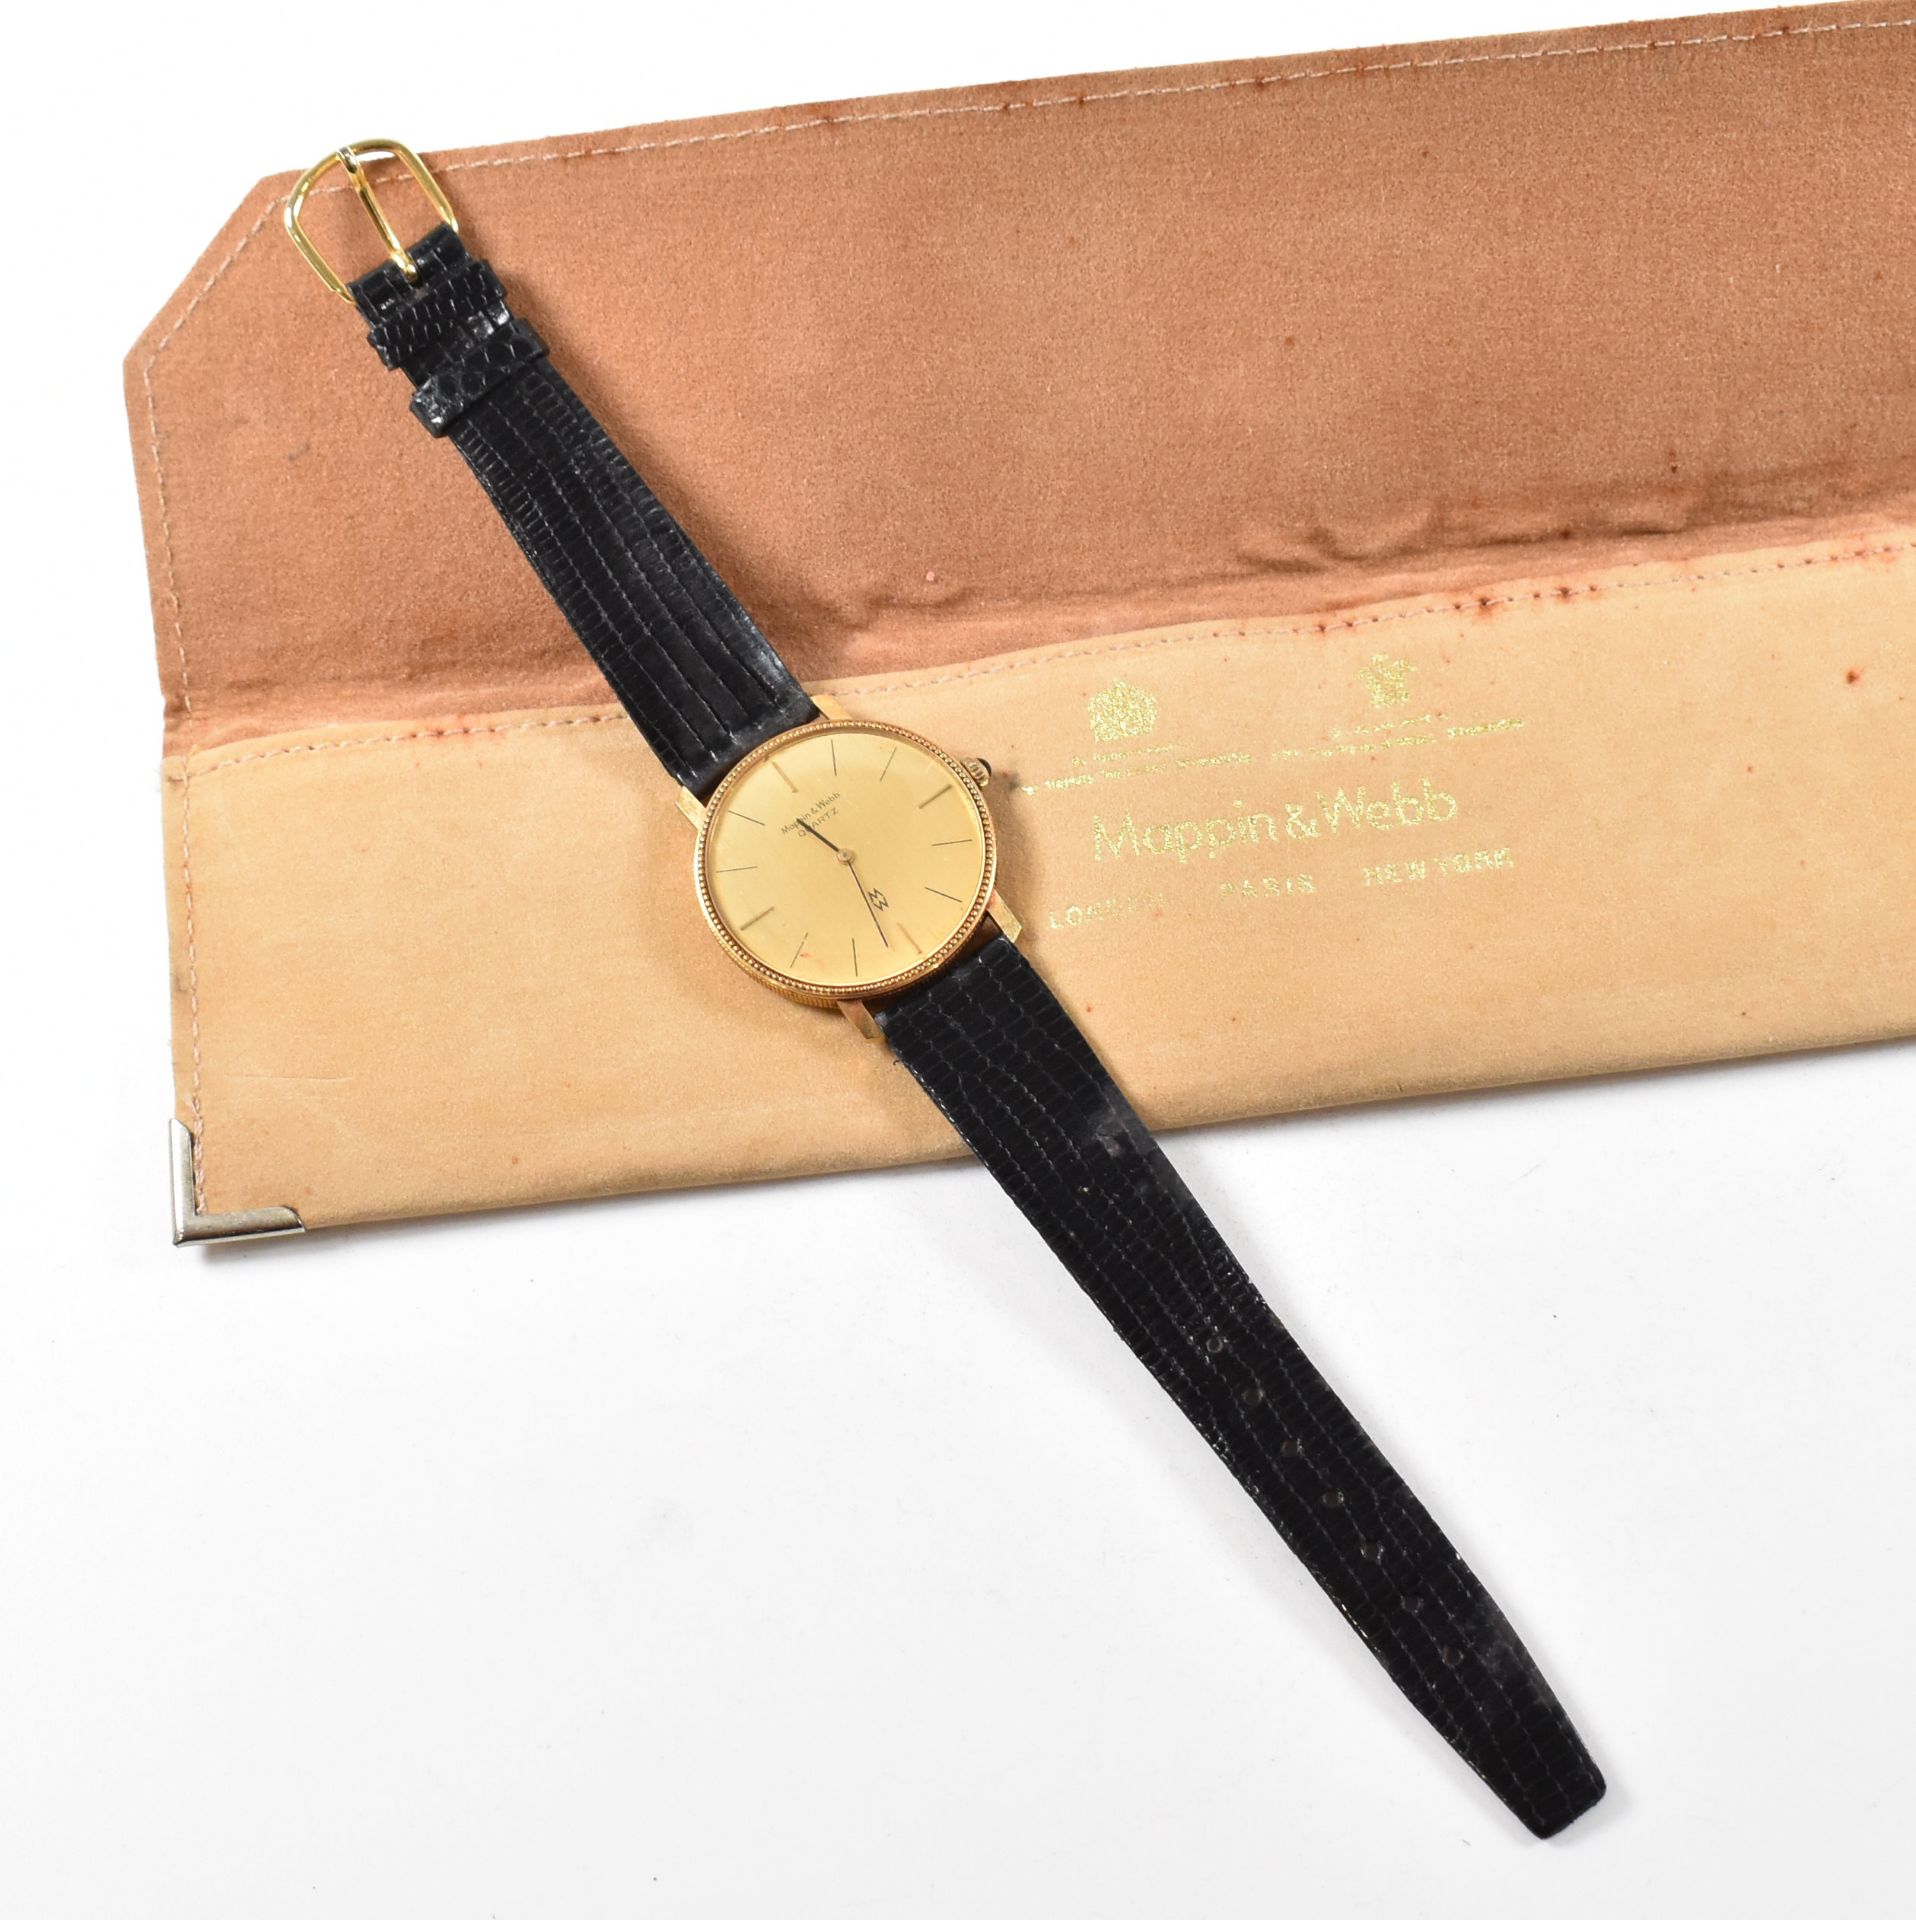 VINTAGE 18CT GOLD CASED MAPPIN & WEBB WRISTWATCH - Image 2 of 8